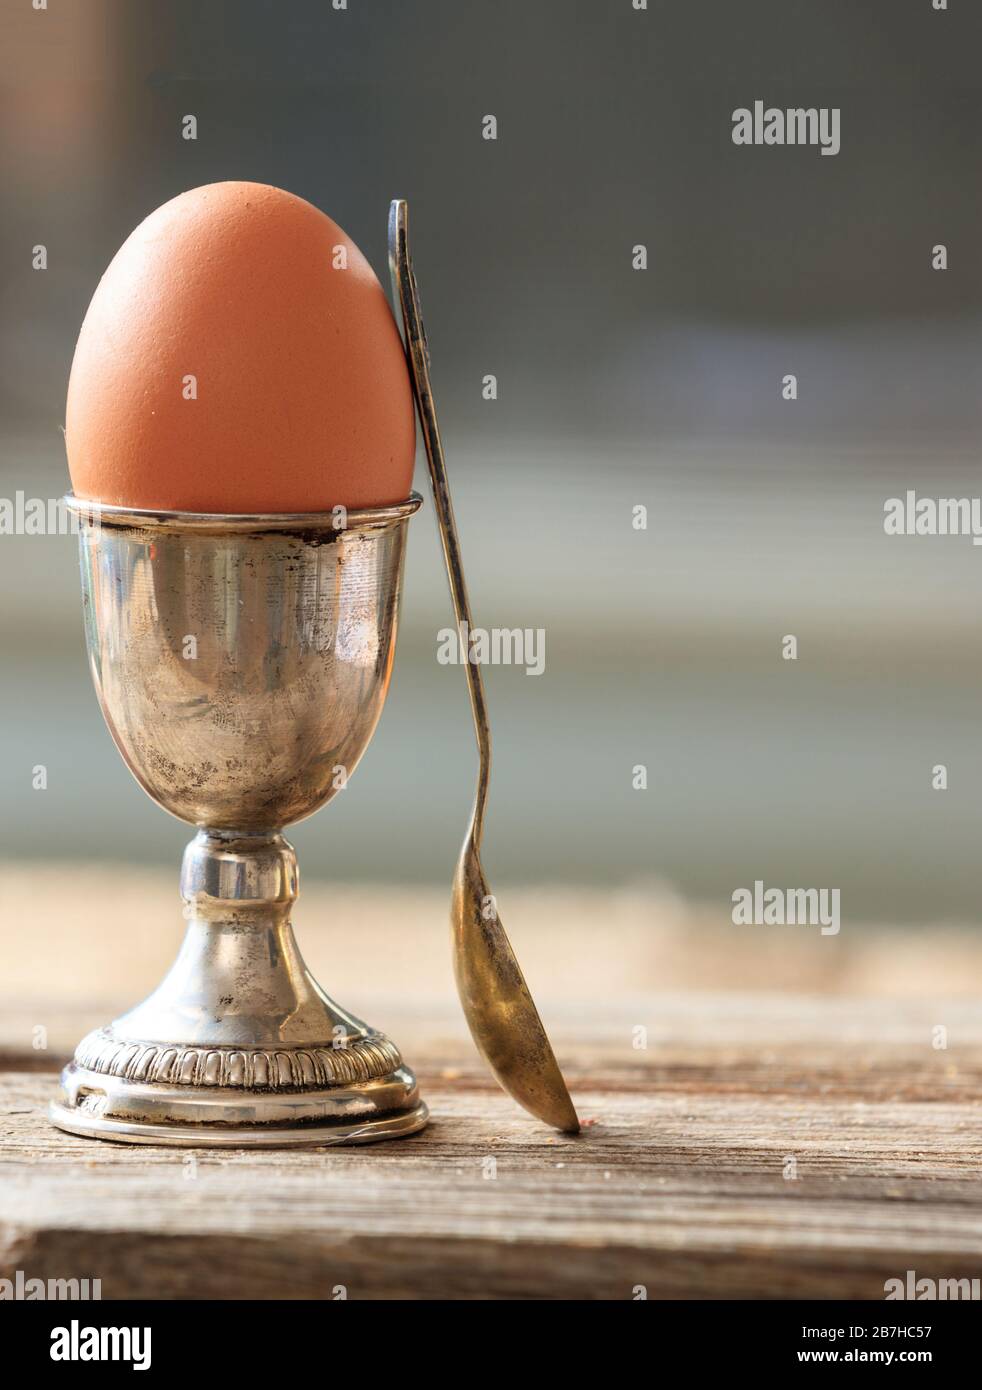 Egg in a silver eggcup and a spoon on wooden table. Vertical portrait of the set and a fresh full protein brown egg. Blur background, space. Stock Photo